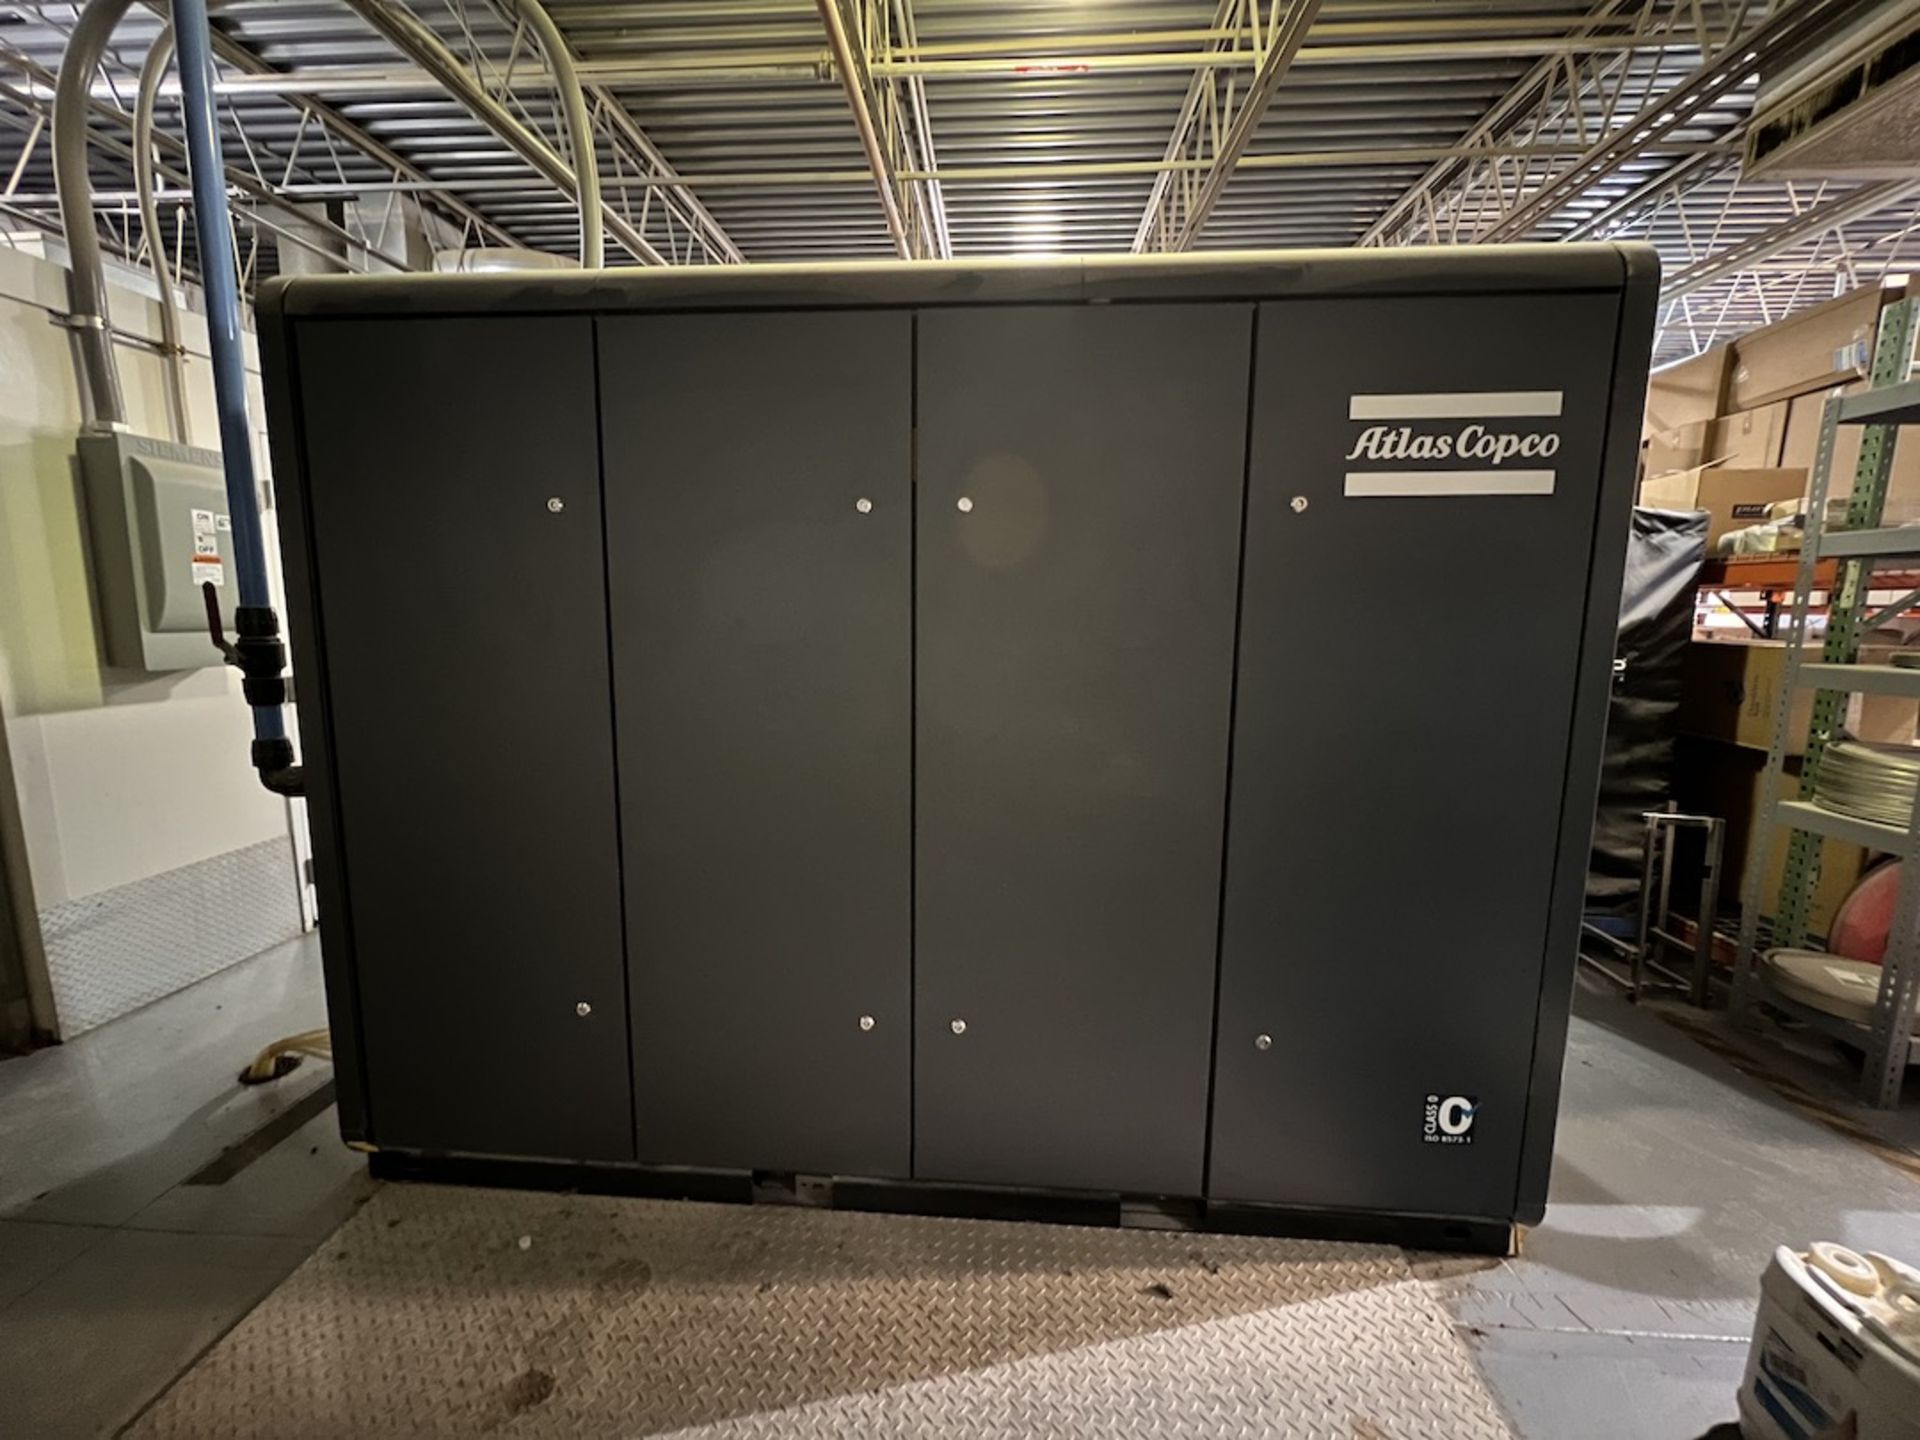 2019 ATLAS COPCO AIR COMPRESSOR, MODEL ZT90VSD-FF, S/N AIA 0116669, APPROX. 17,404 HOURS, IMD 260 - Image 7 of 26